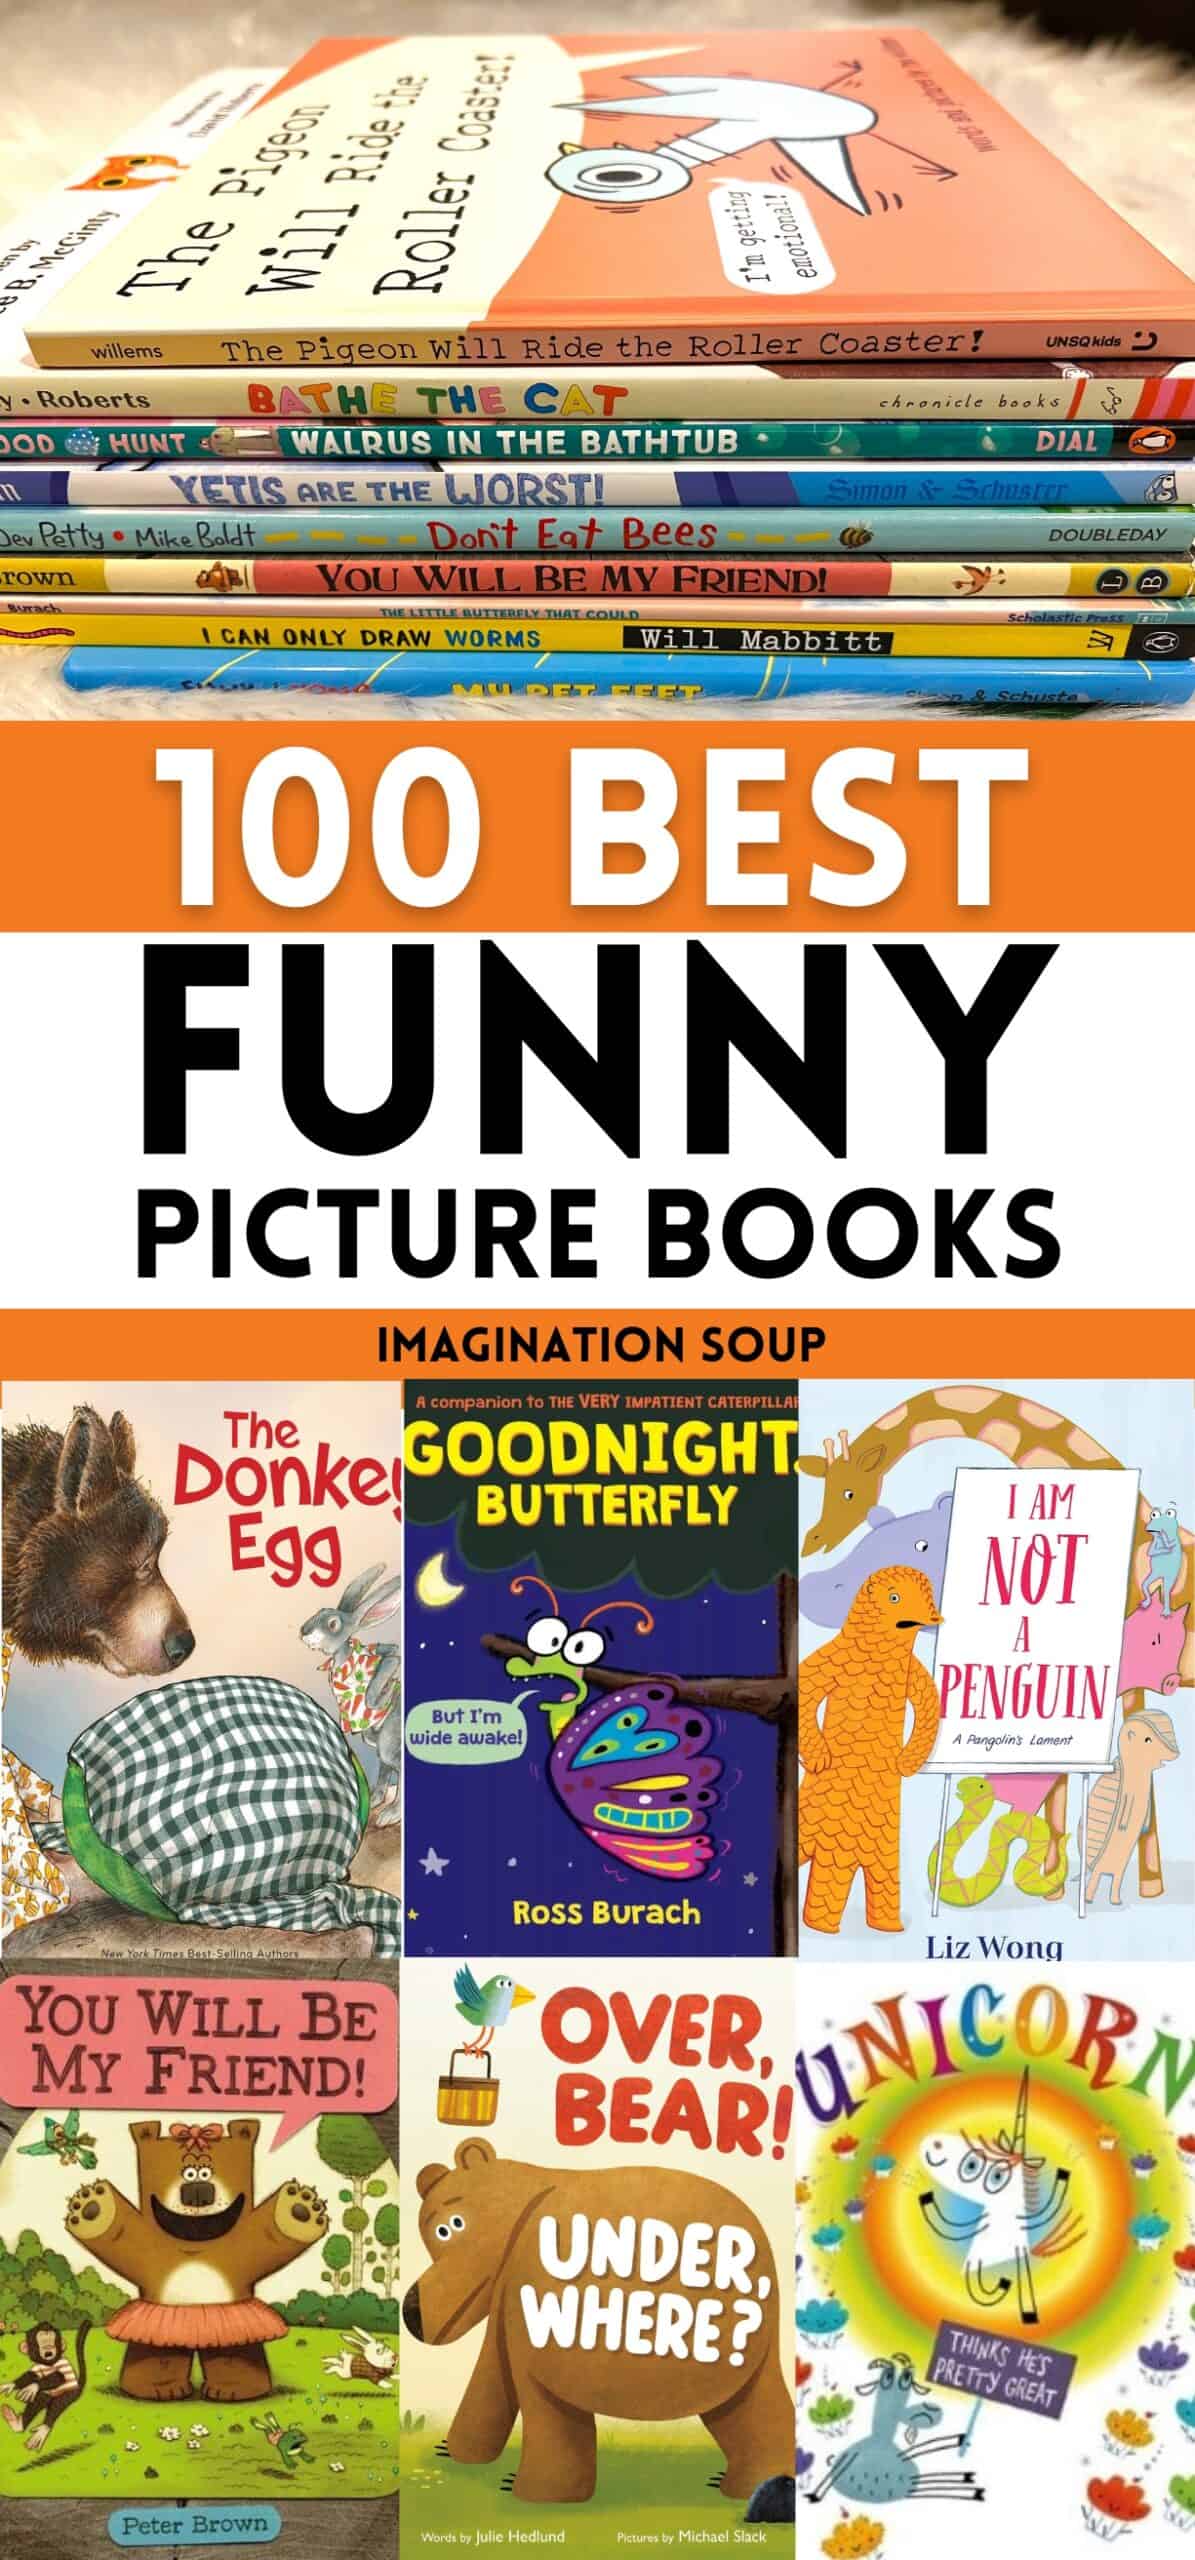 100 best funny picture books for kids